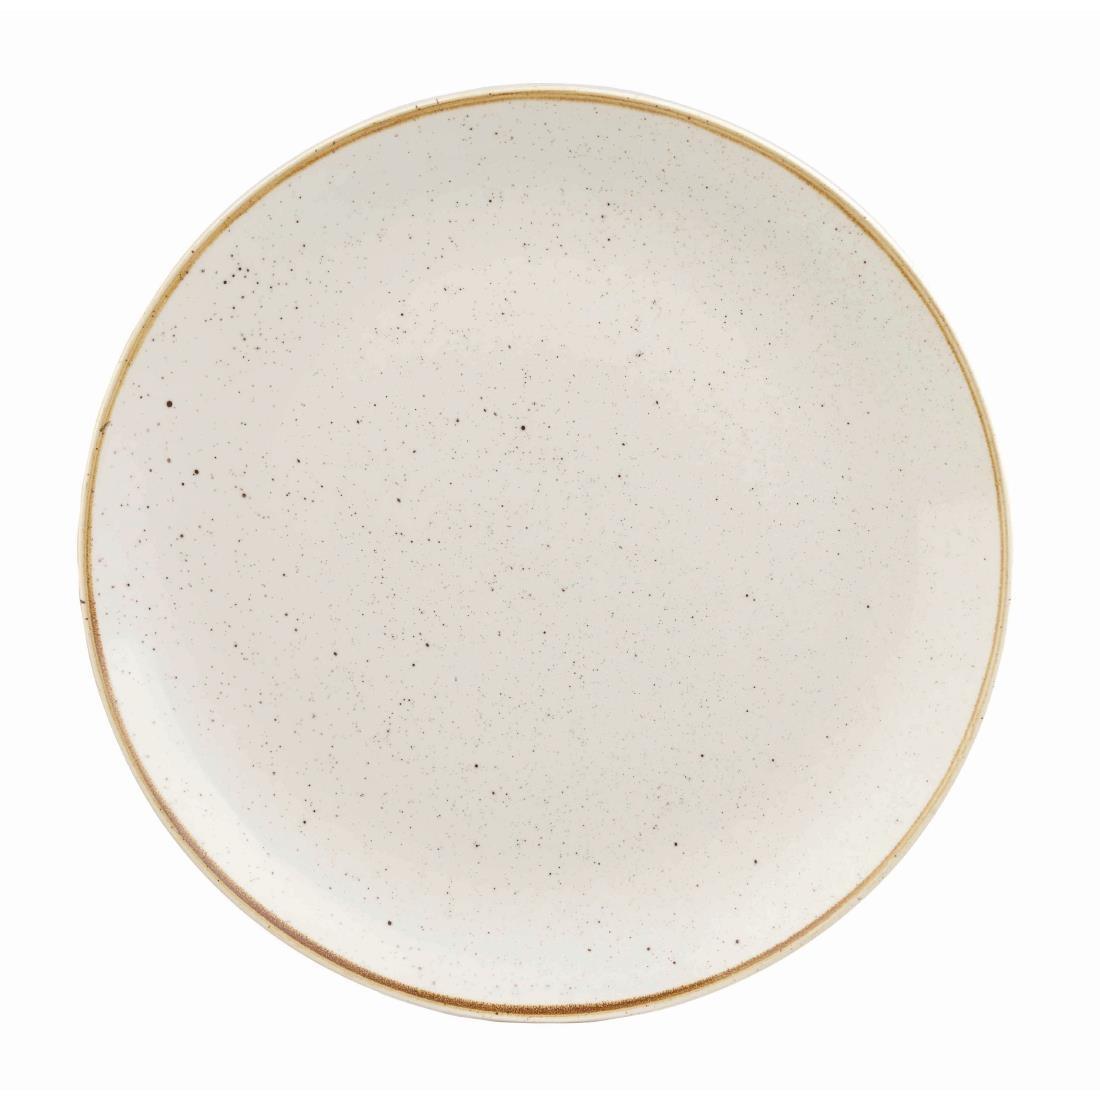 Churchill Stonecast Round Coupe Plate Barley White 200mm (Pack of 12) - DK519  - 1